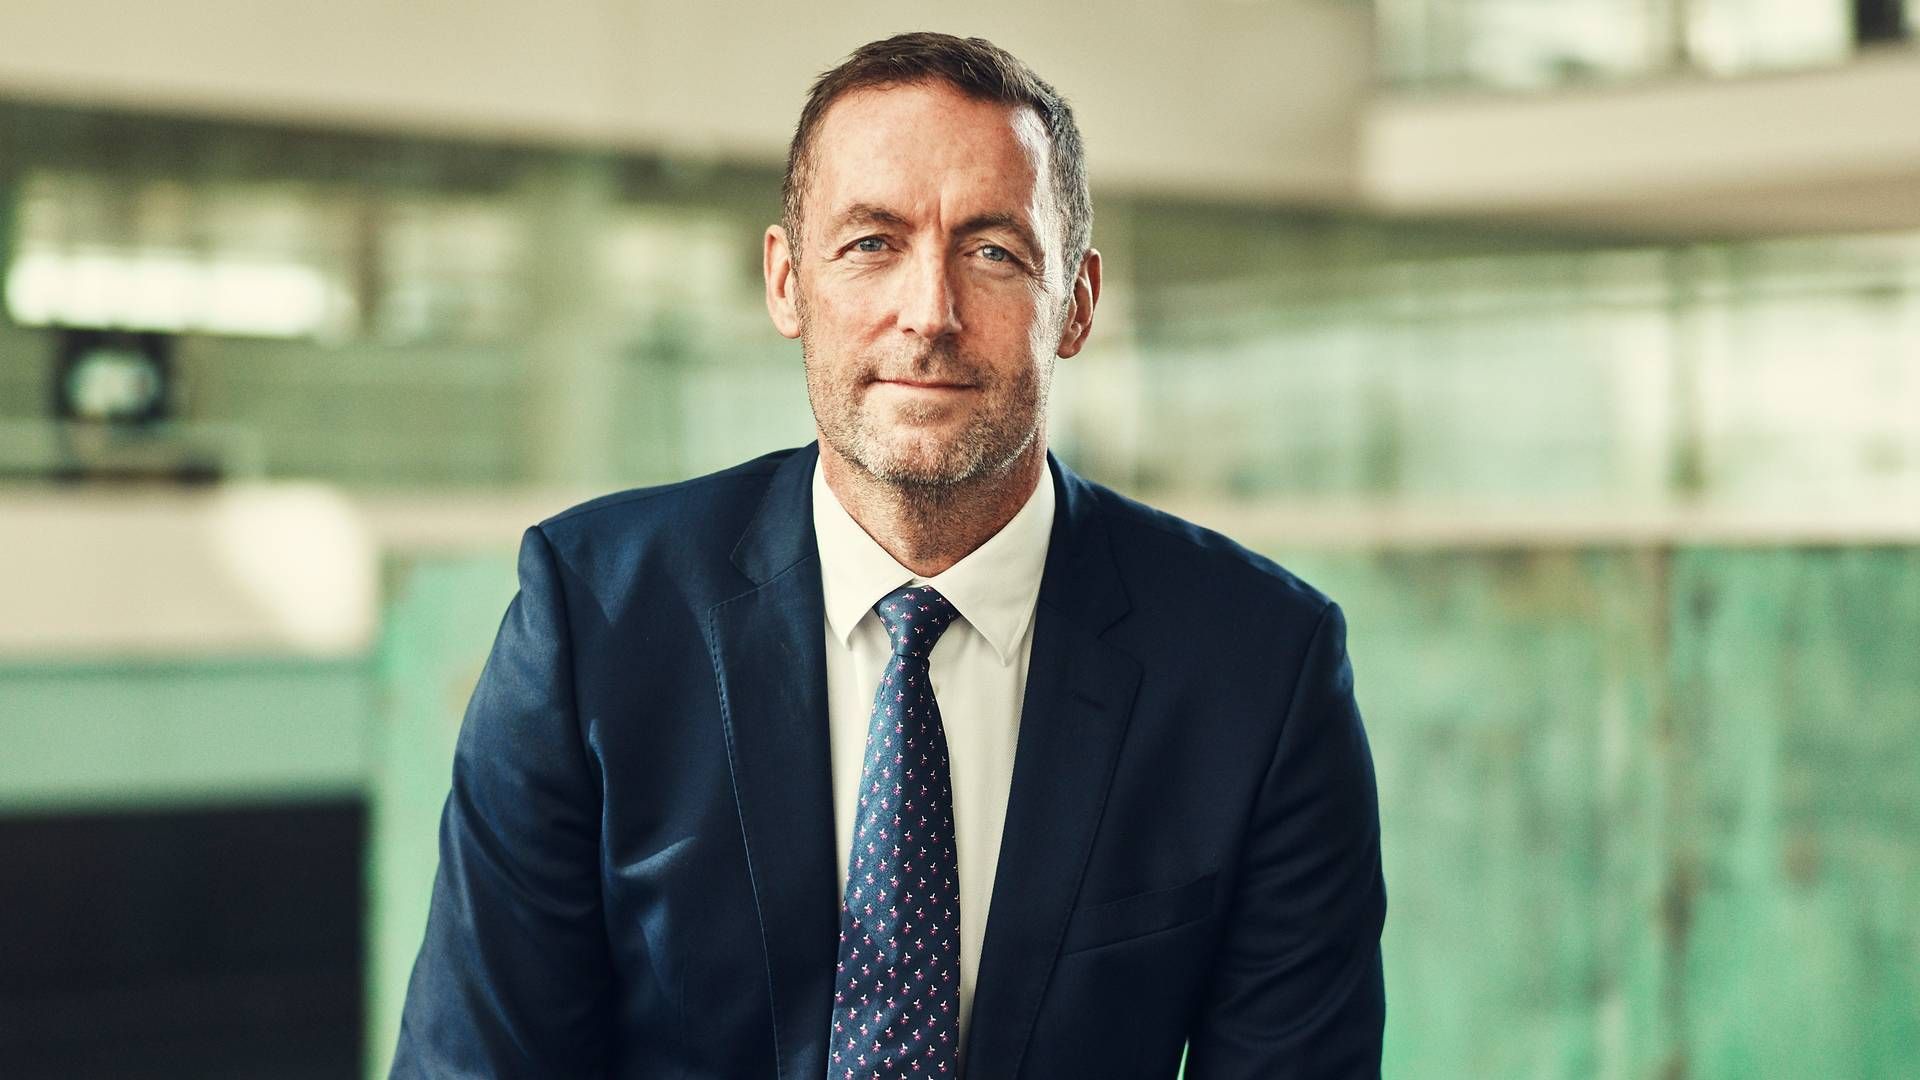 Jørgen Søgaard-Andersen, CEO of Sparinvest, defends agreement exit costs at Sparinvest with consideration for company operations. | Photo: Sparinvest/pr